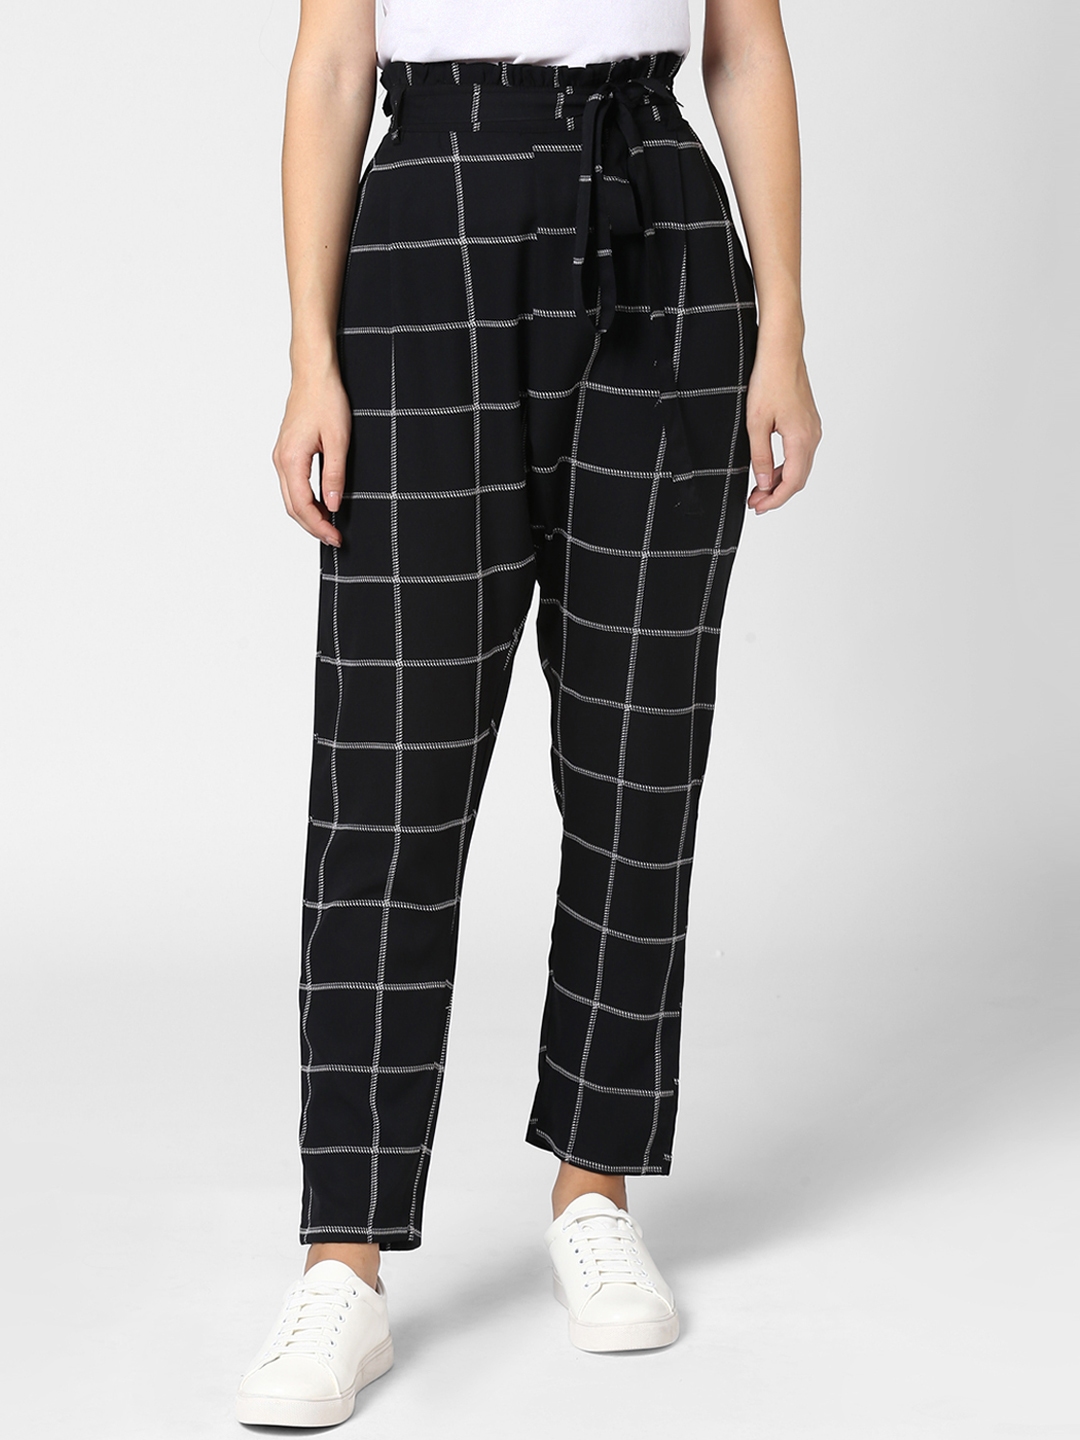 Weekday tailored trousers in black and white check  ASOS